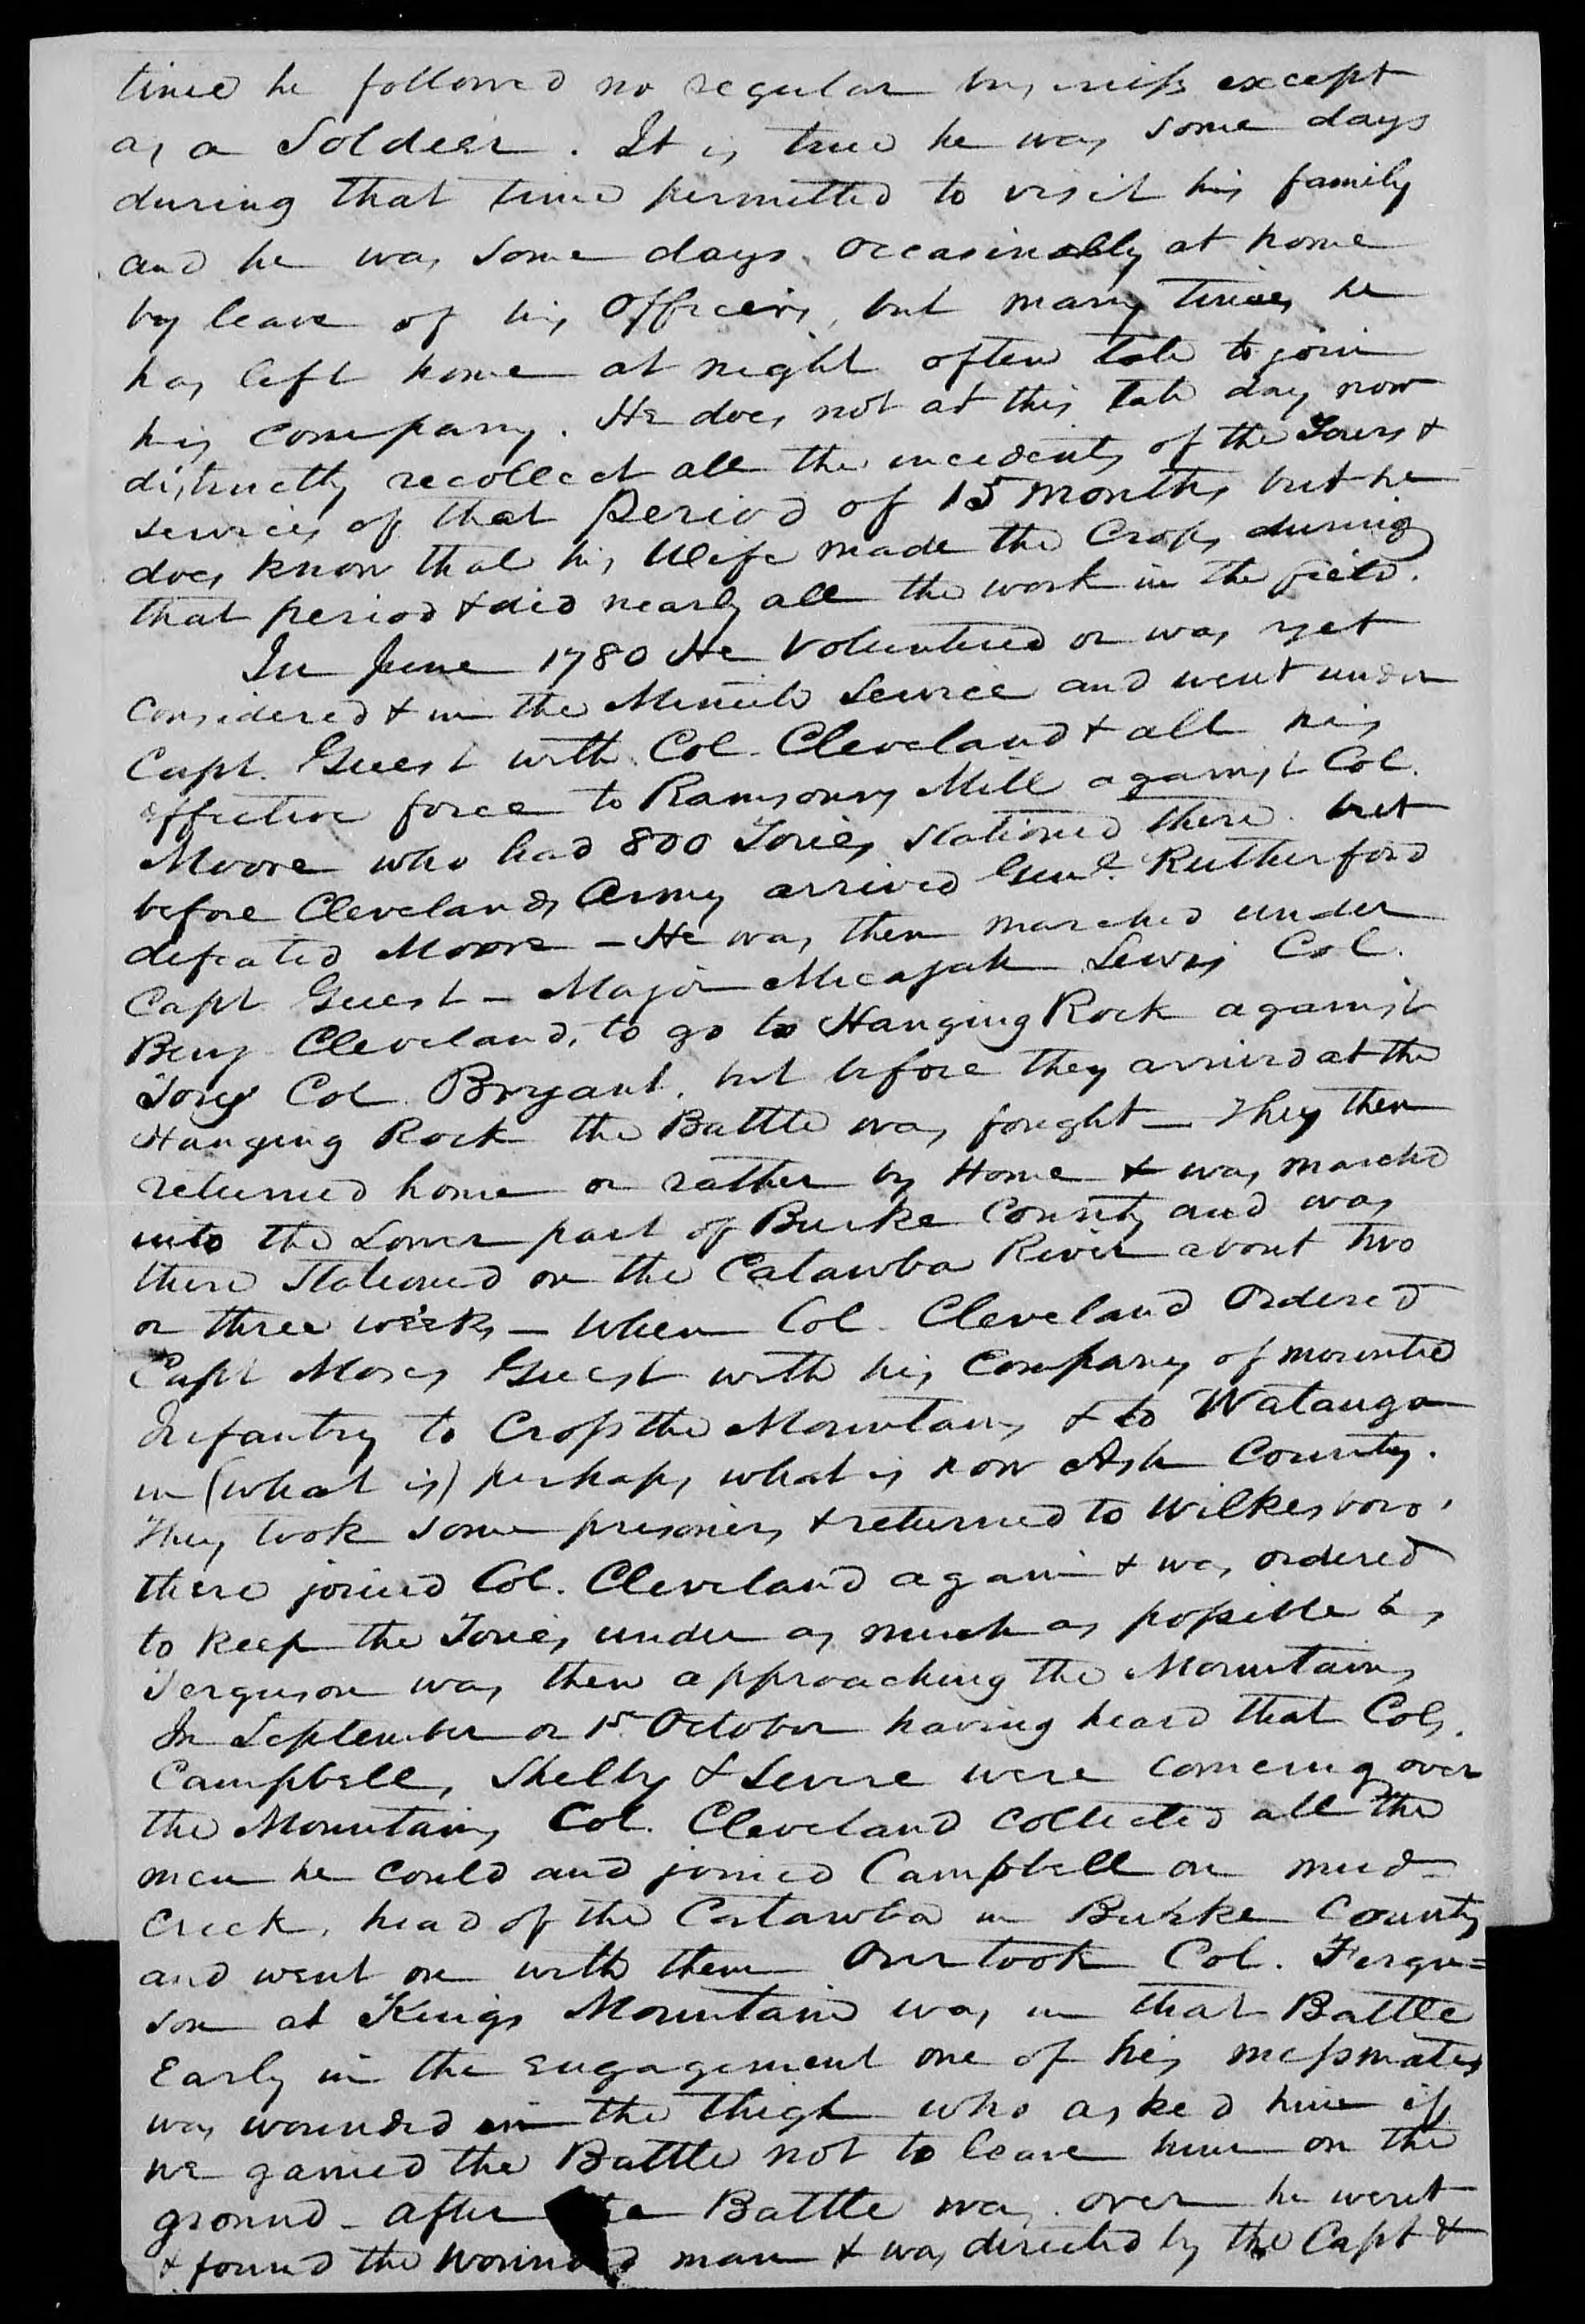 Application for a Veteran's Pension from William Guest, 9 March 1835, page 2